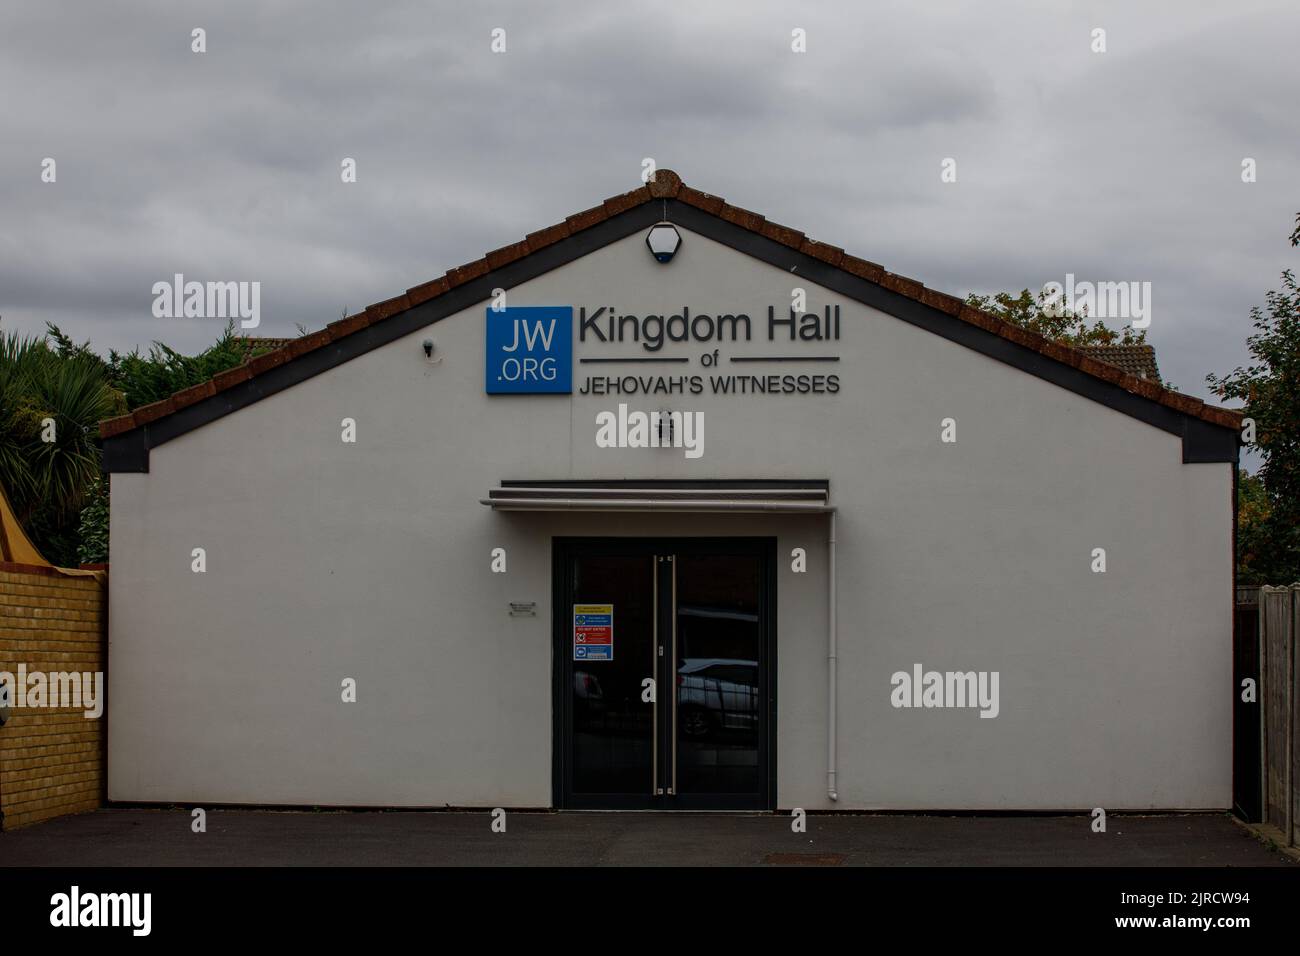 Jehovah Witness Kingdom Hall, church exterior in England Stock Photo